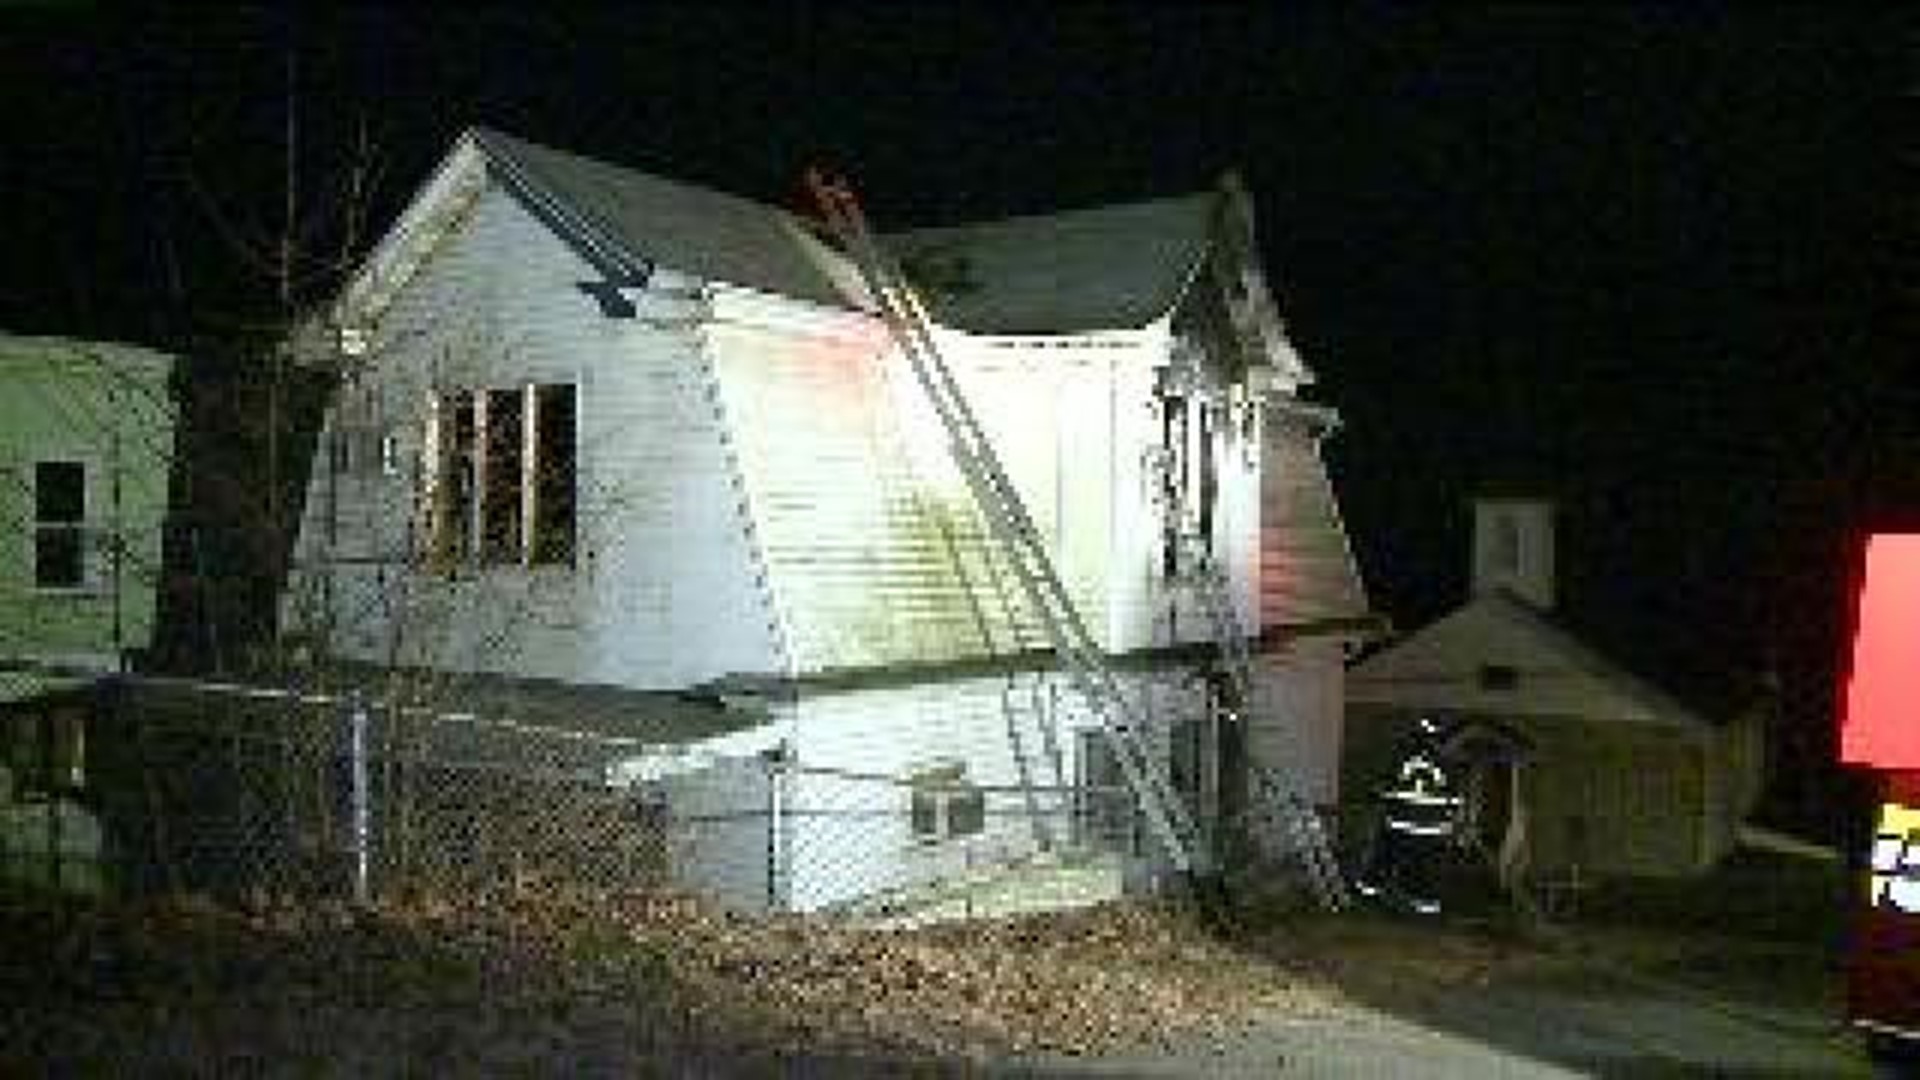 Fire Marshal to Investigate House Fire